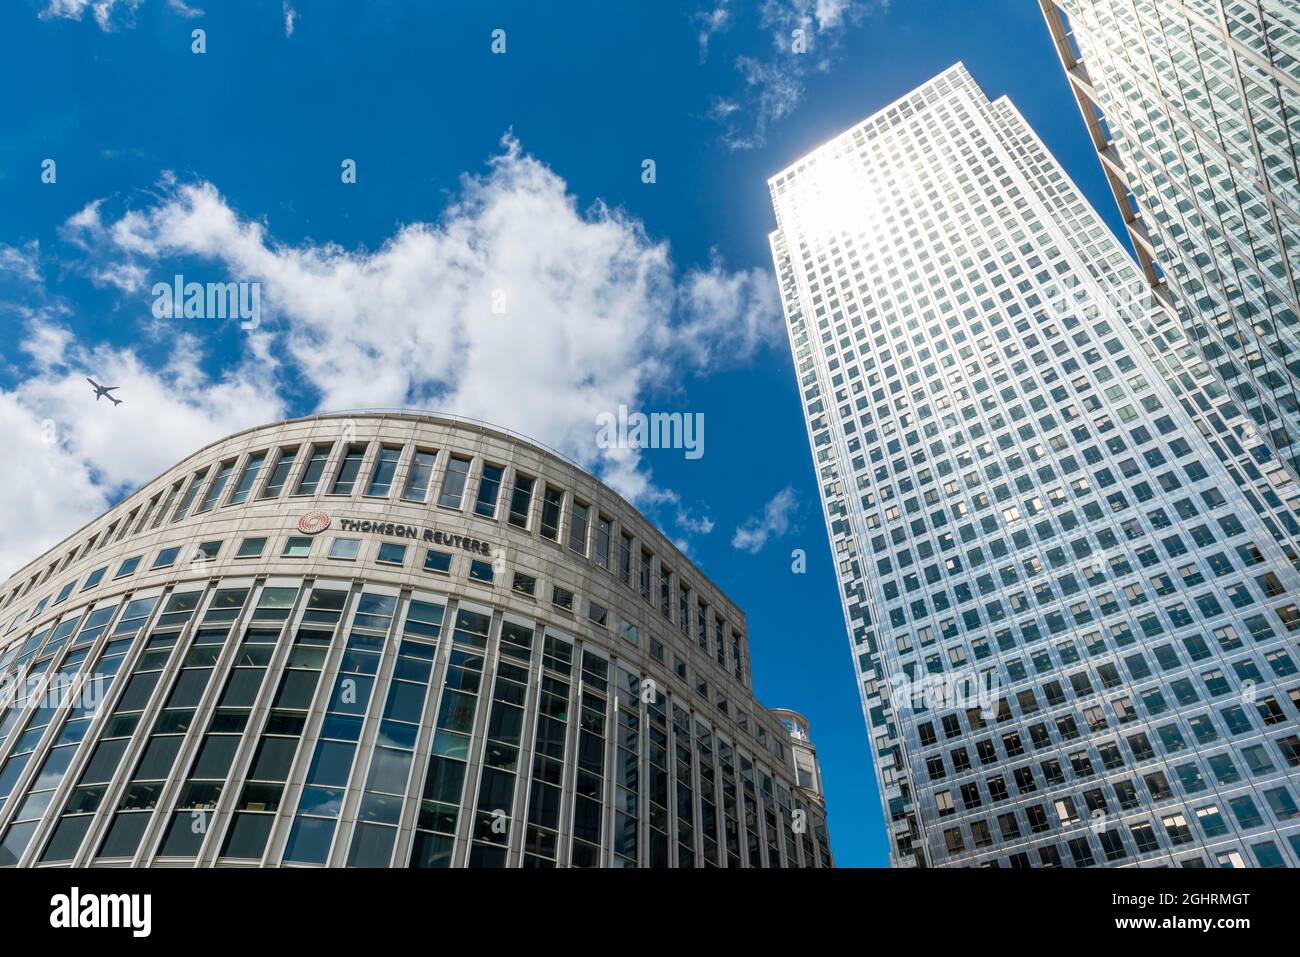 Thomson Reuters Buildings and Skyscrapers, One Canada Square, Canary Wharf, London, England, United Kingdom Stock Photo